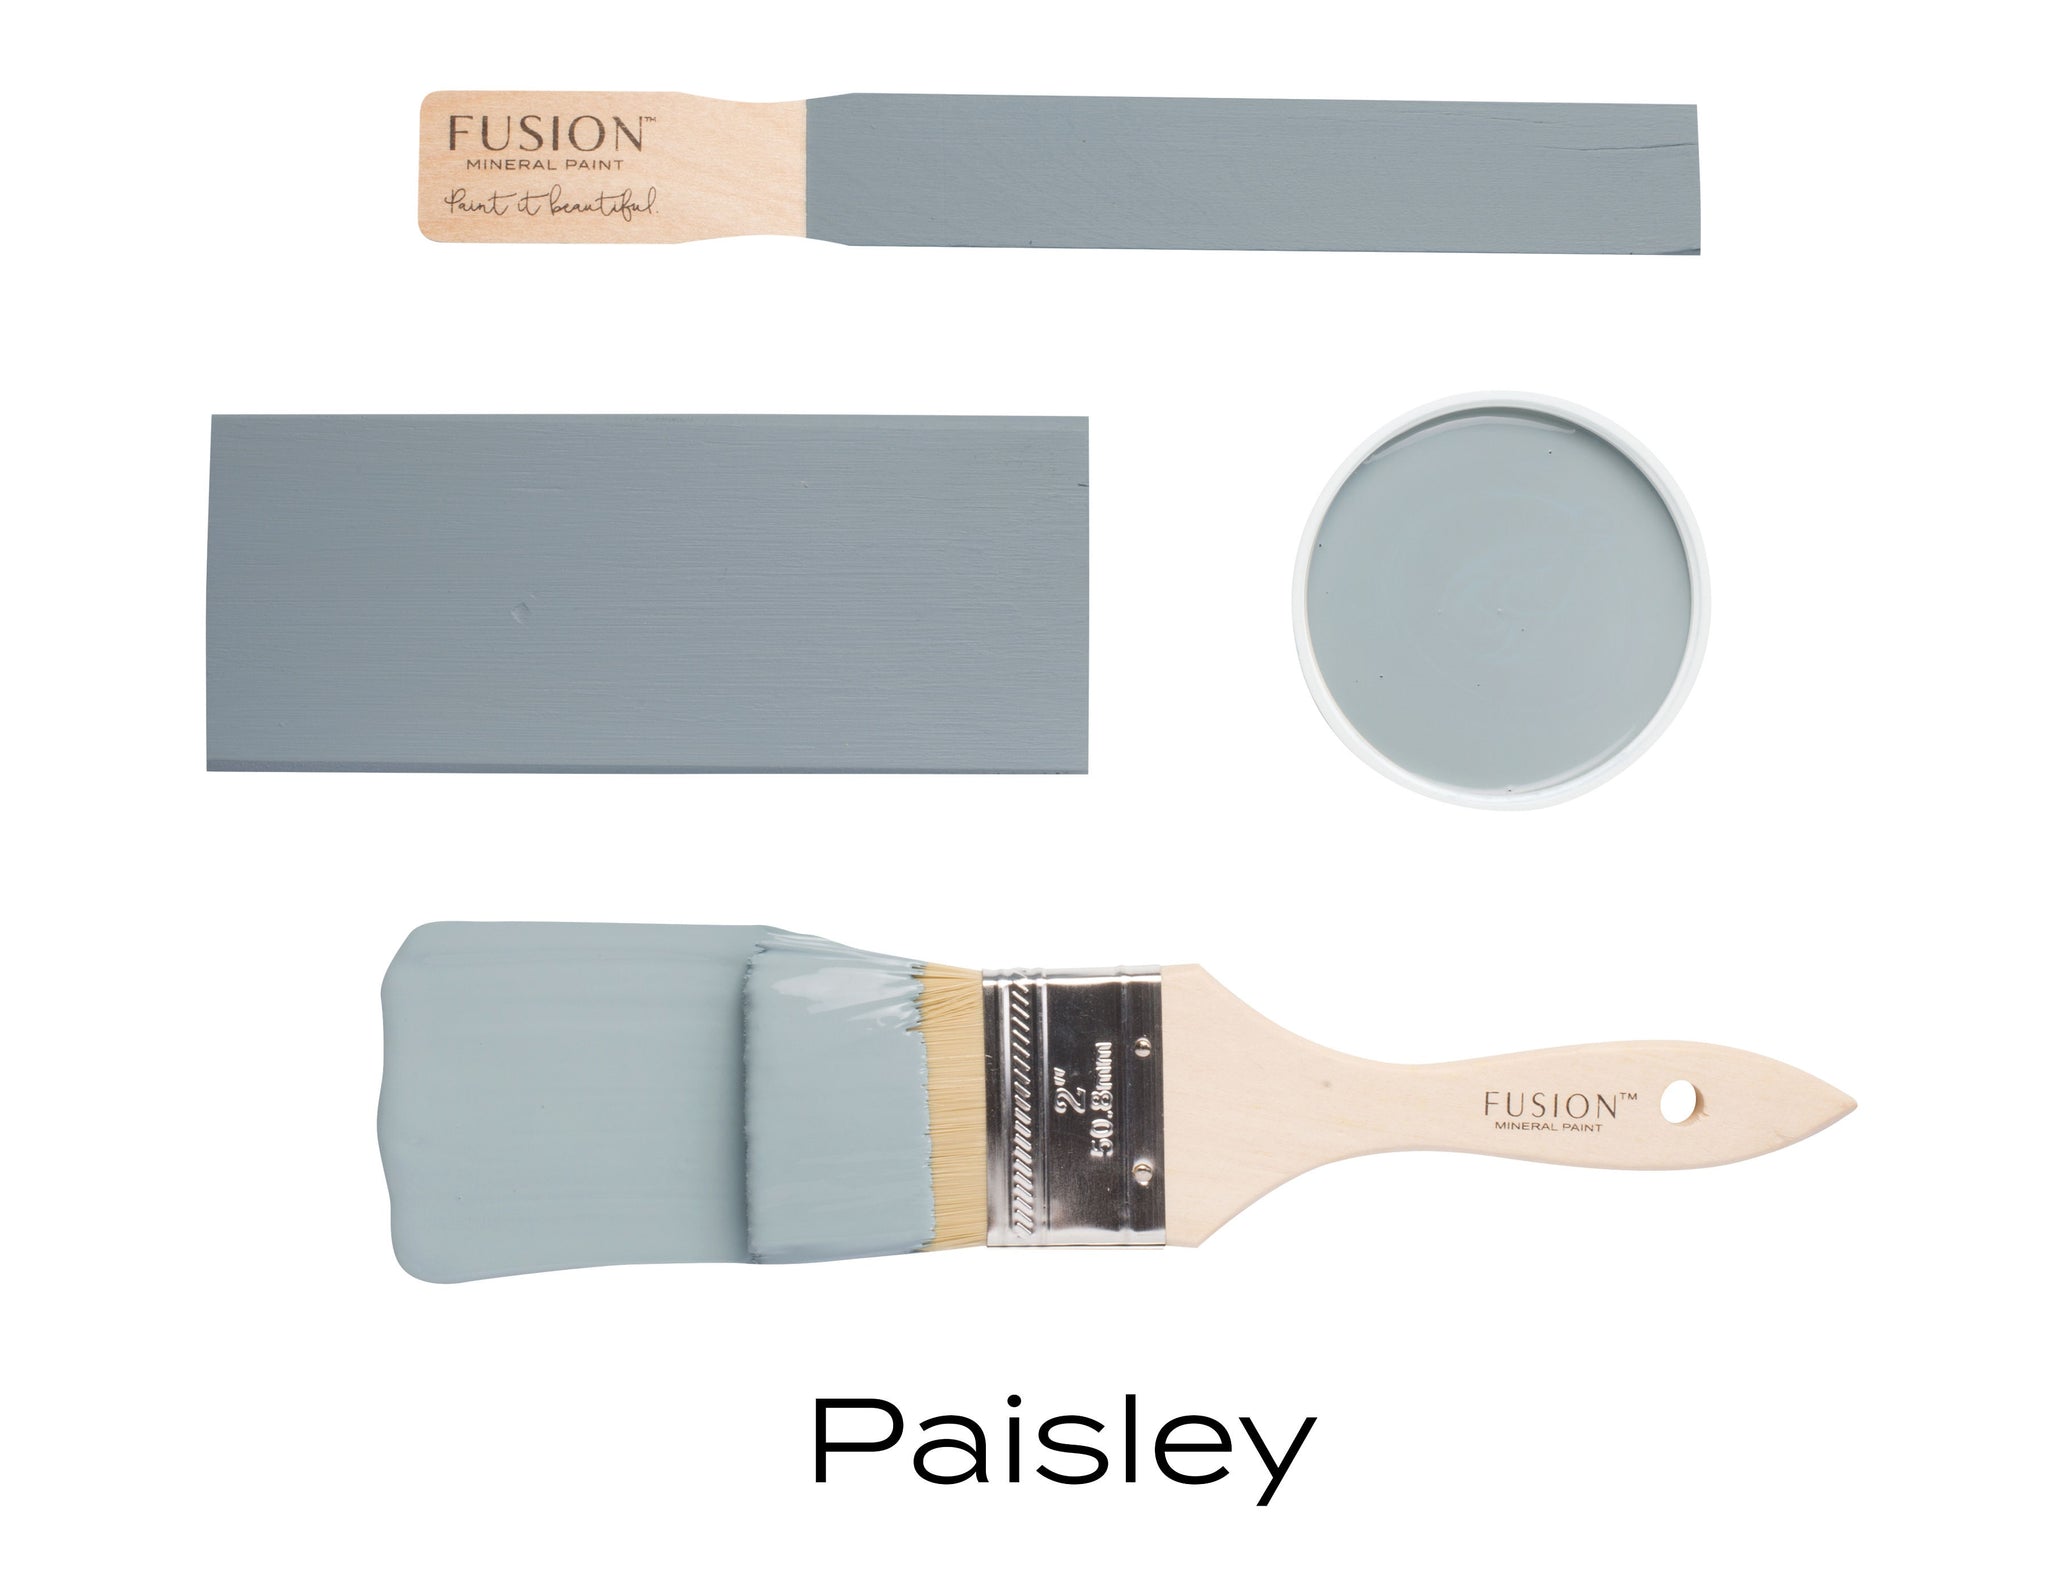 FUSION™ MINERAL PAINT - Paisley